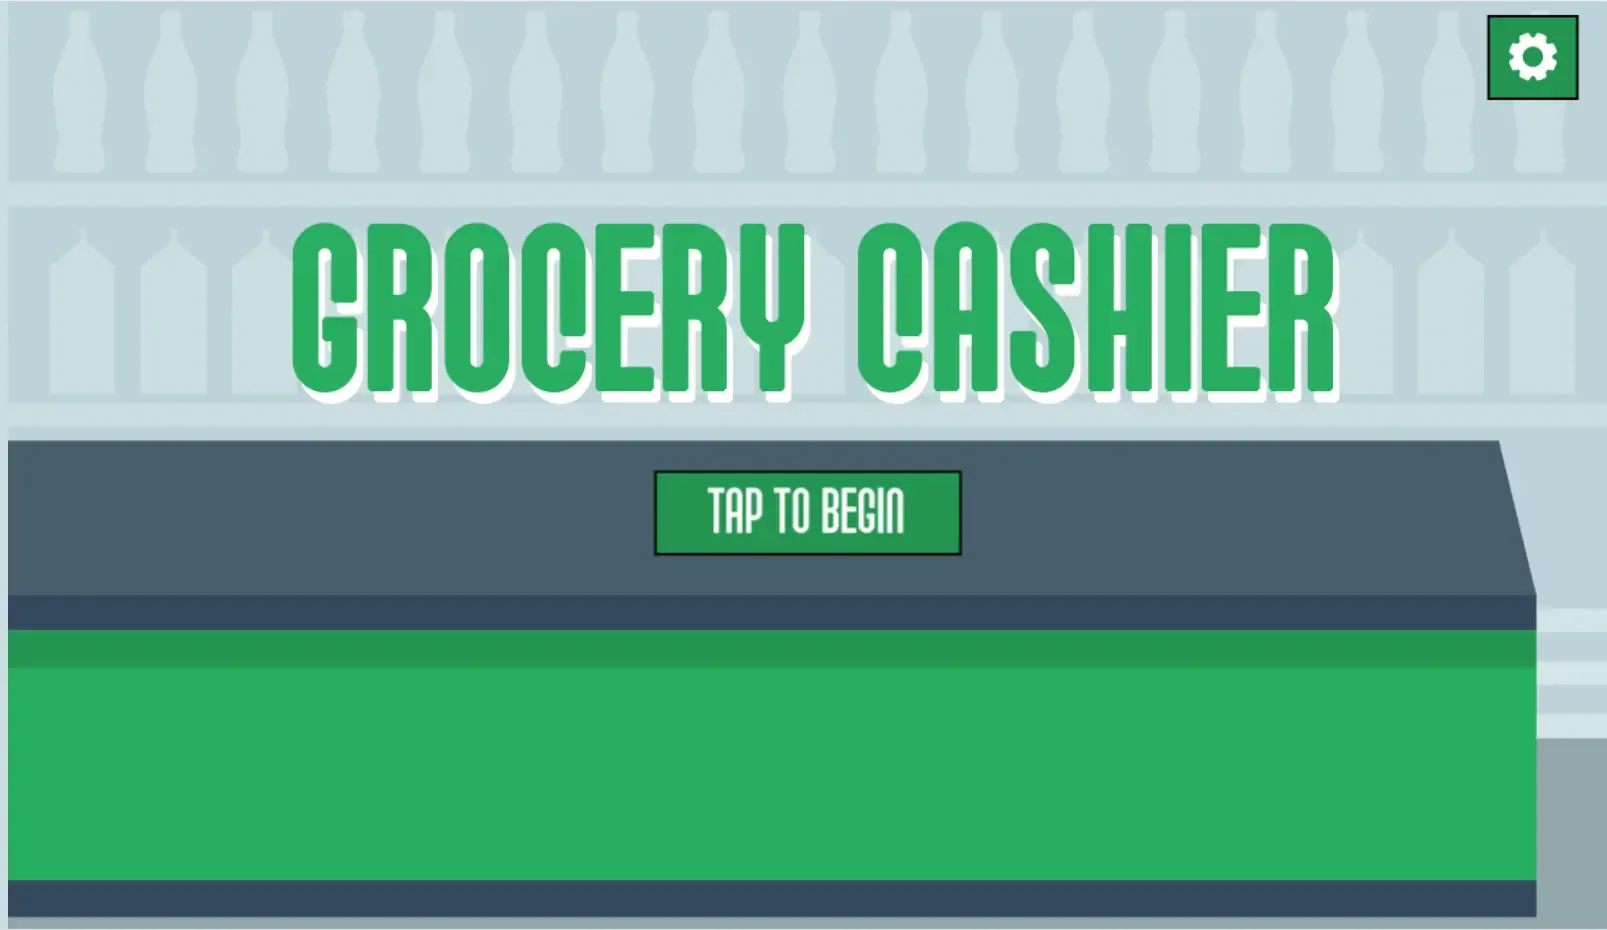 Grocery Cashier online money game